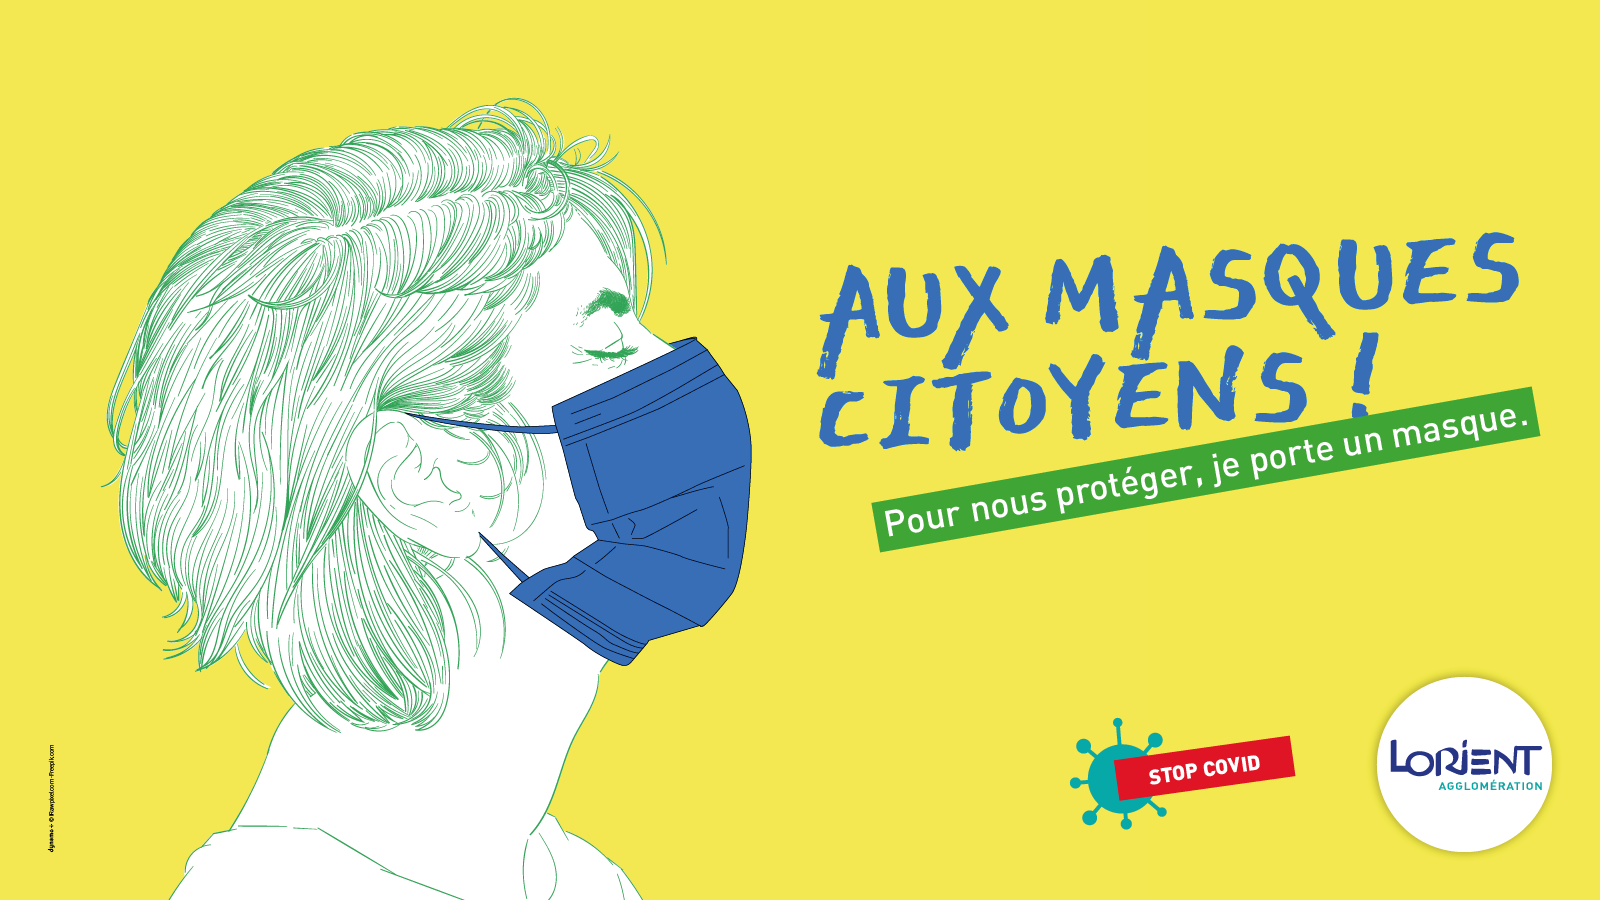 Campagne Aux masques citoyens